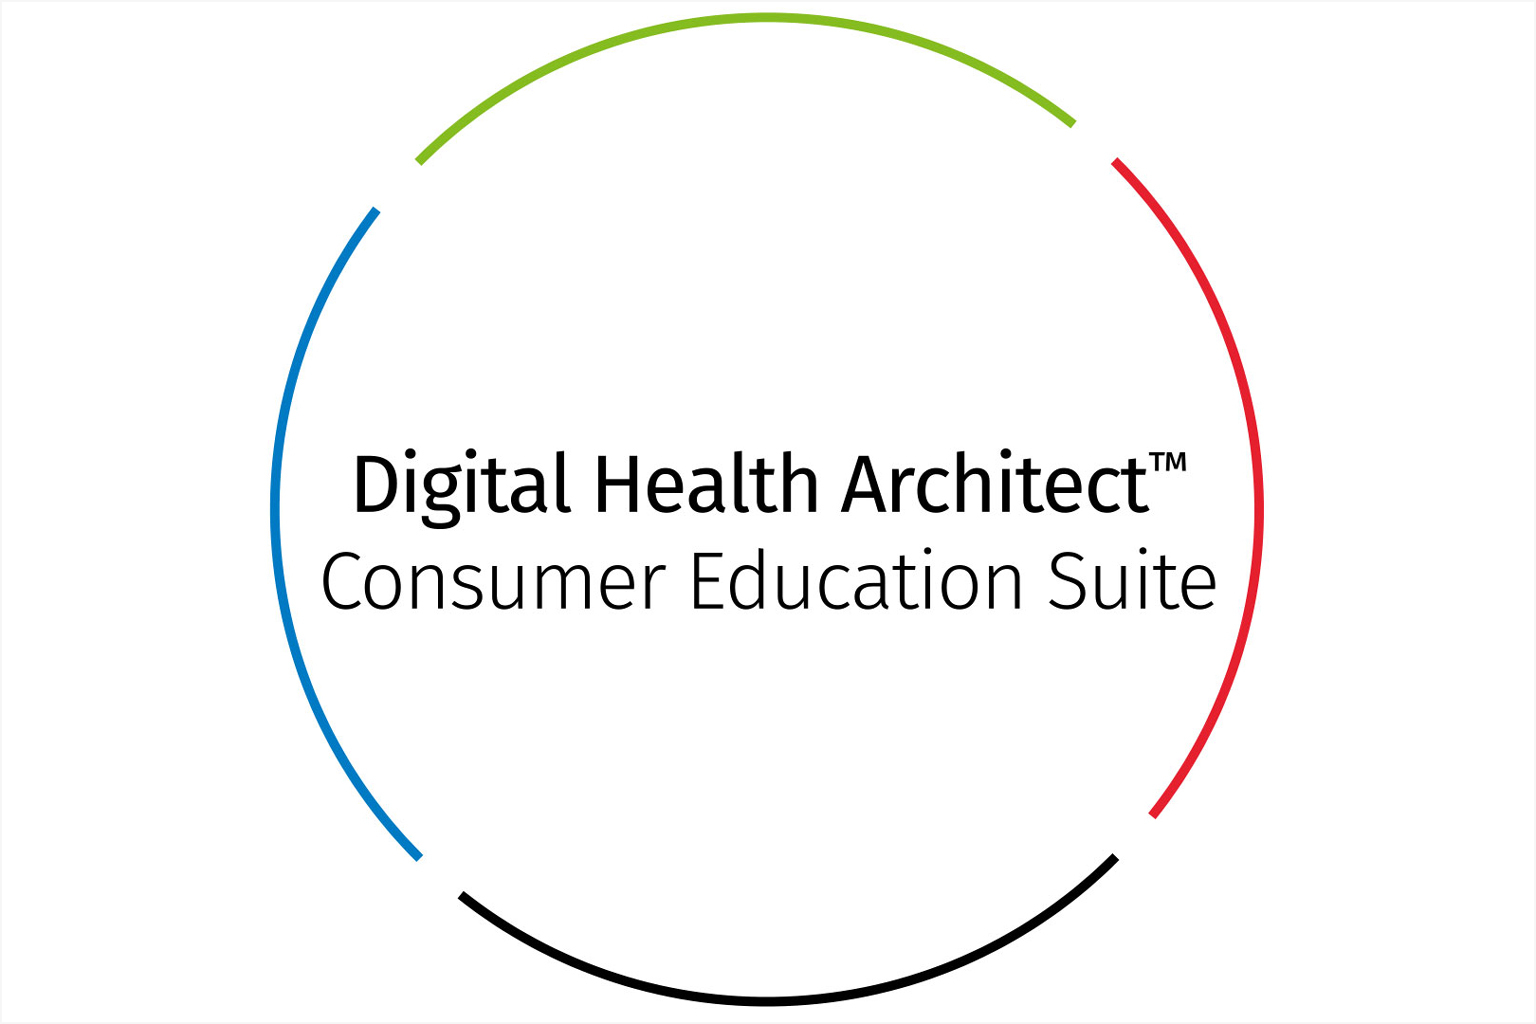 Consumer Education Suite Overview Video